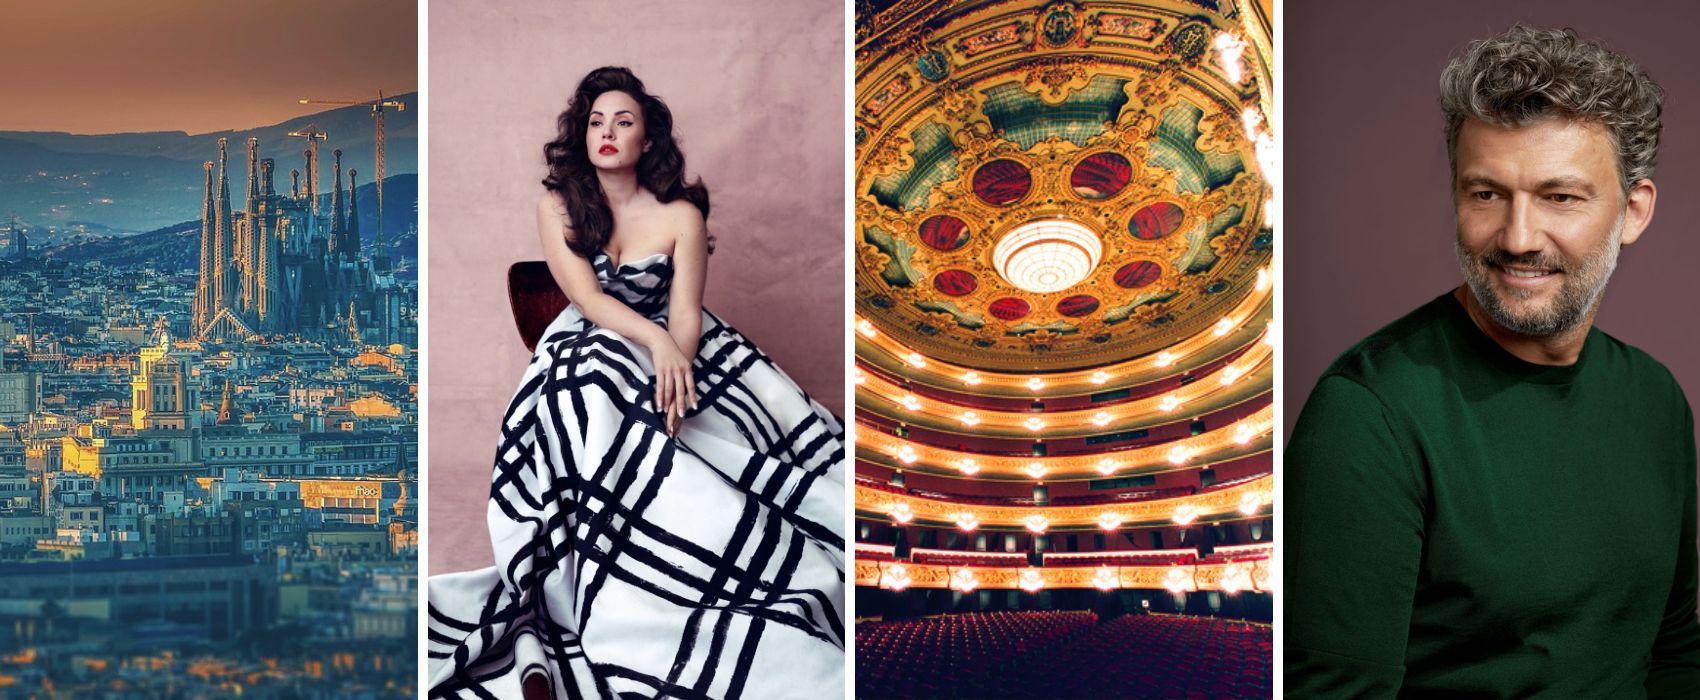 Barcelona from 21/06 to 24/06: Yoncheva and Kaufmann in the legend (Copie)